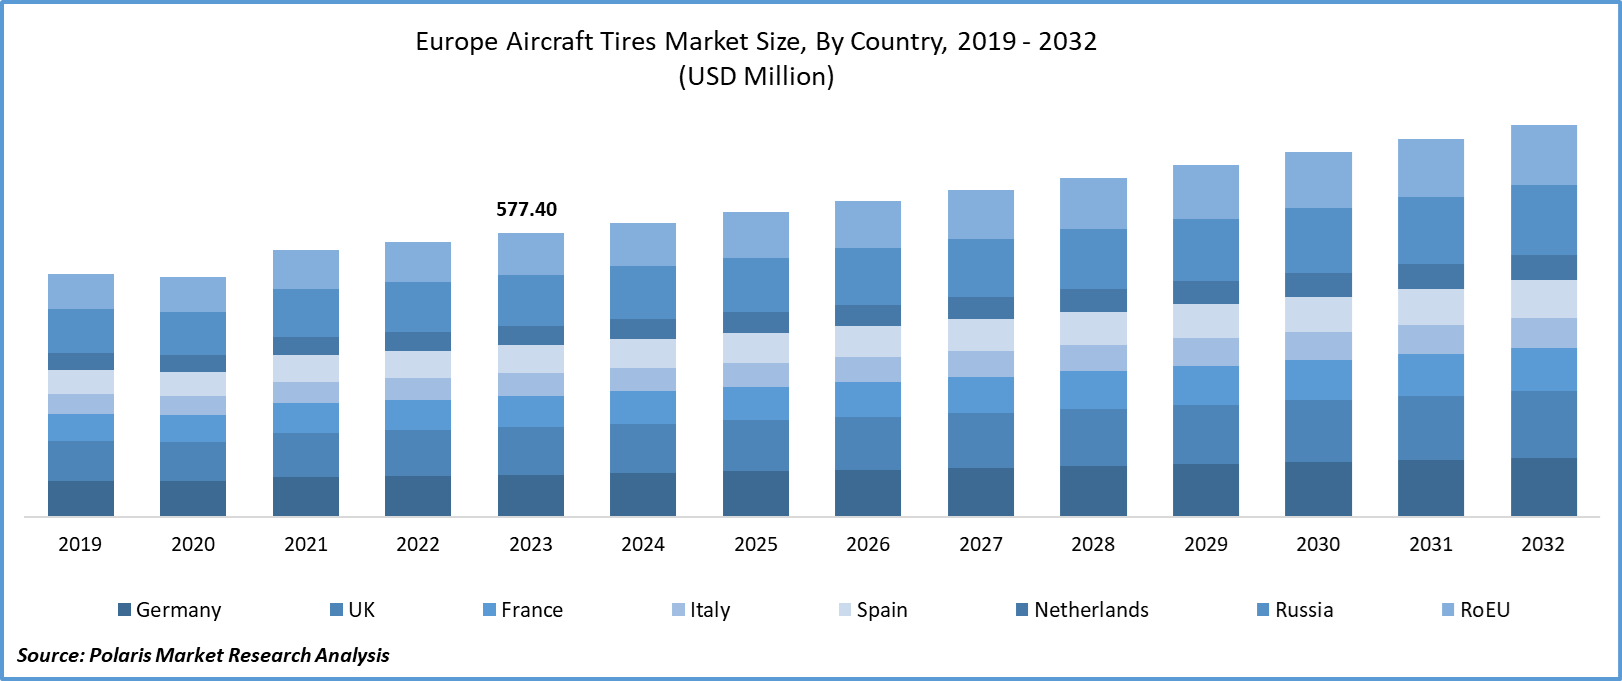 Europe Aircraft Tires Market Size